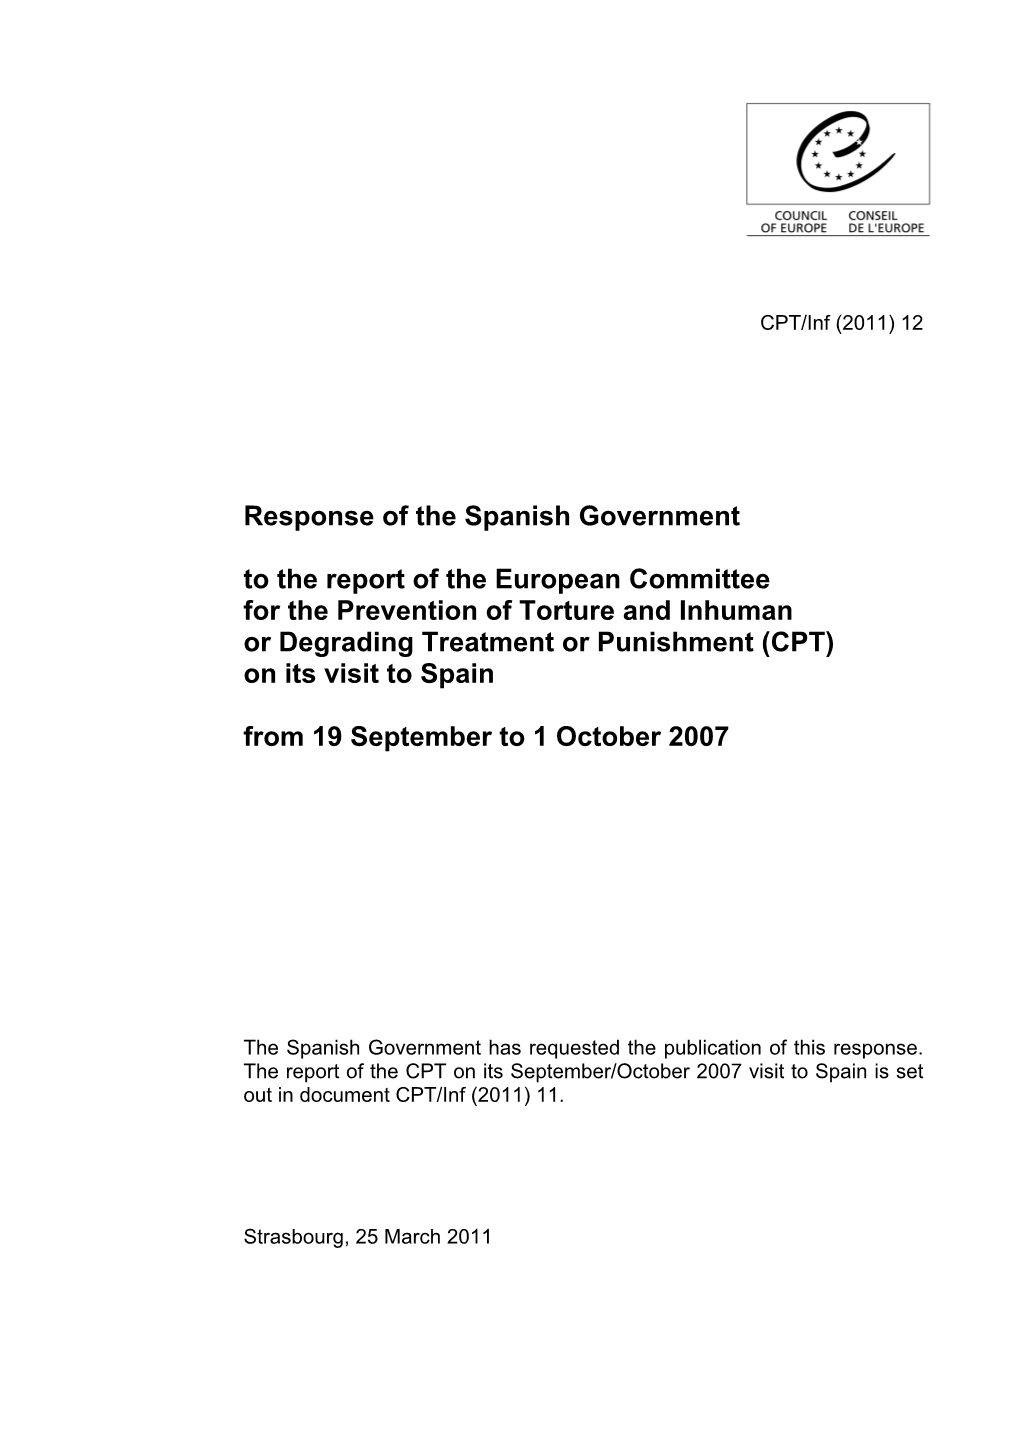 Response of the Spanish Government to the Report of the European